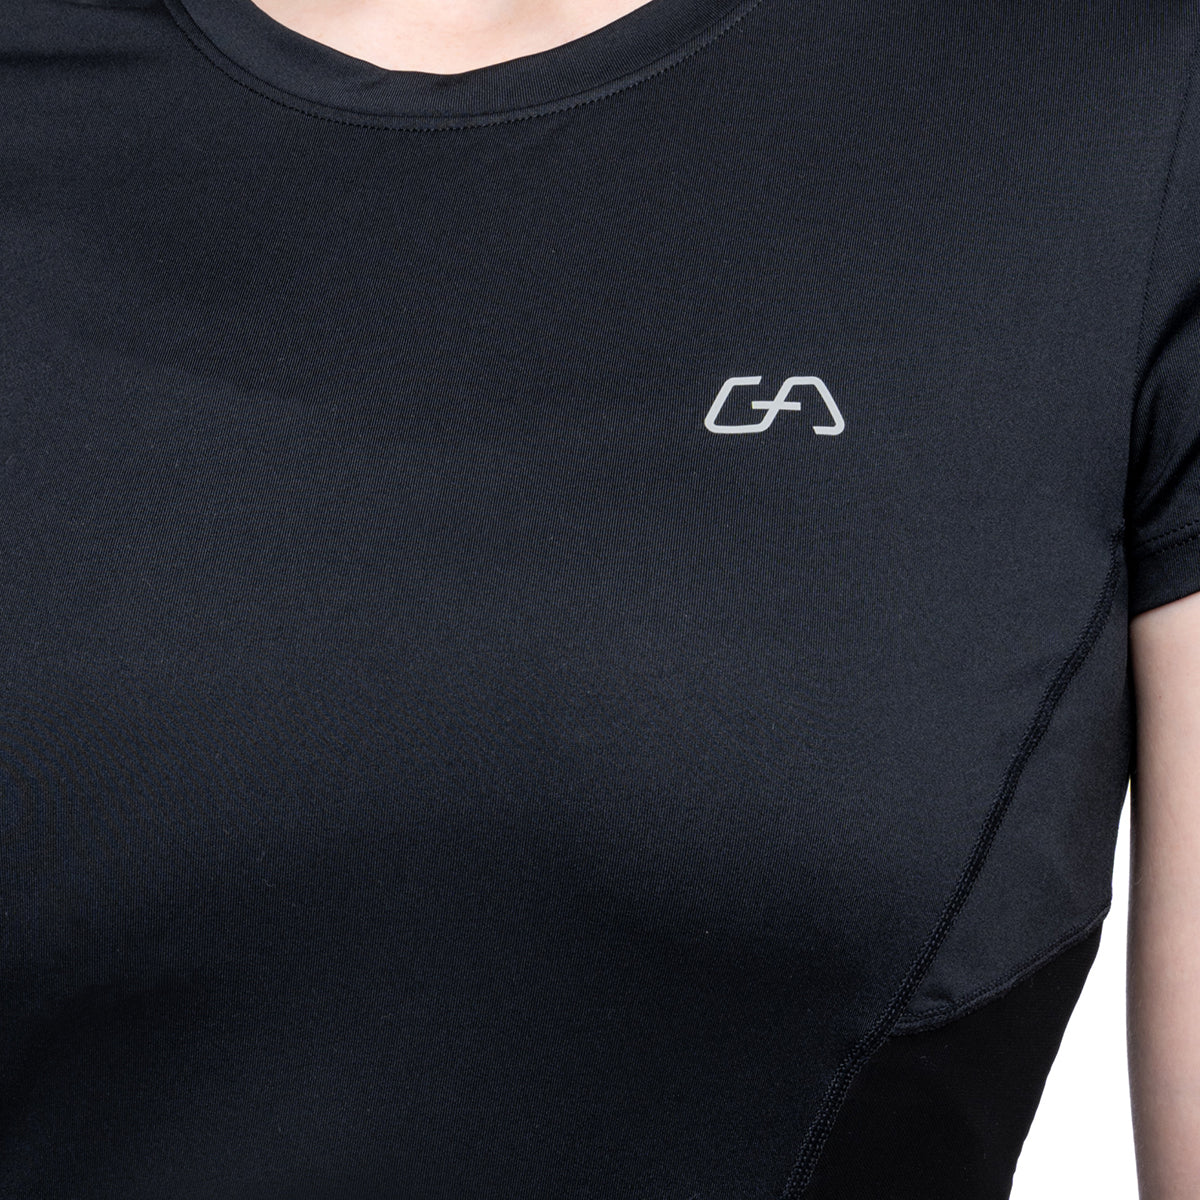 Women's Dry Fit Running Athletic T-Shirts Active Mesh Tee Shirt - Black / S